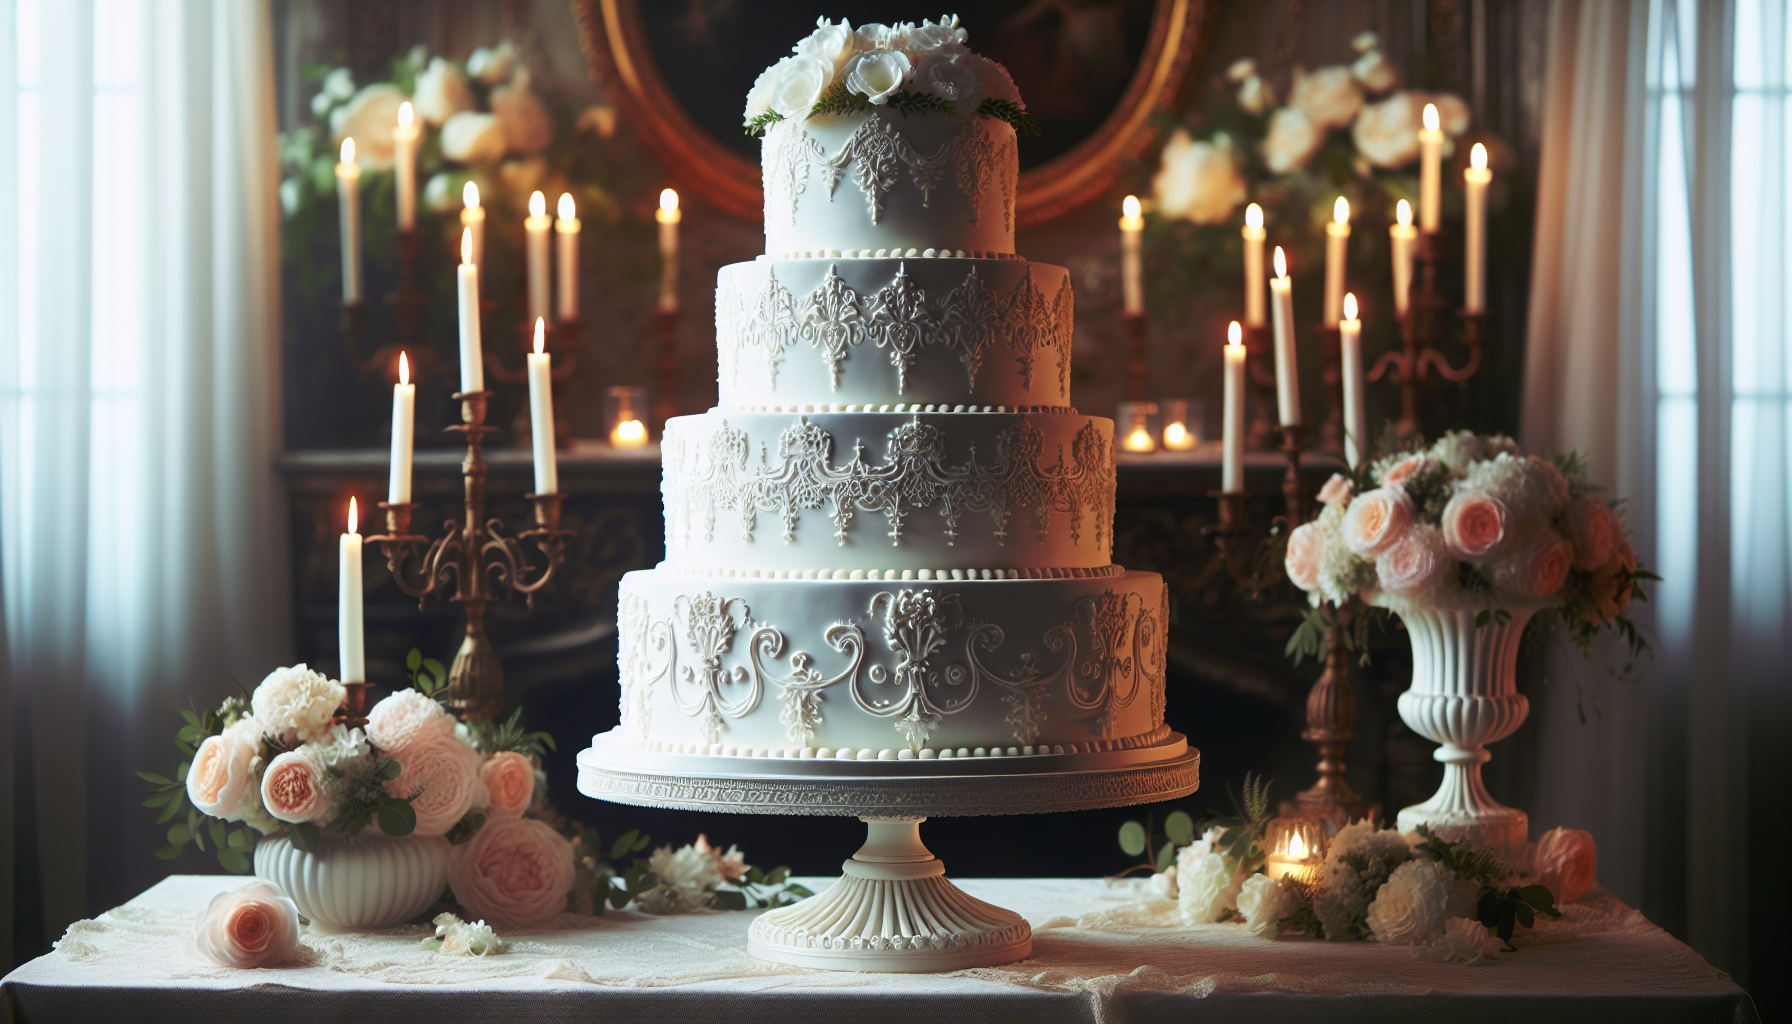 A classic tiered wedding cake elegantly decorated with white fondant and de